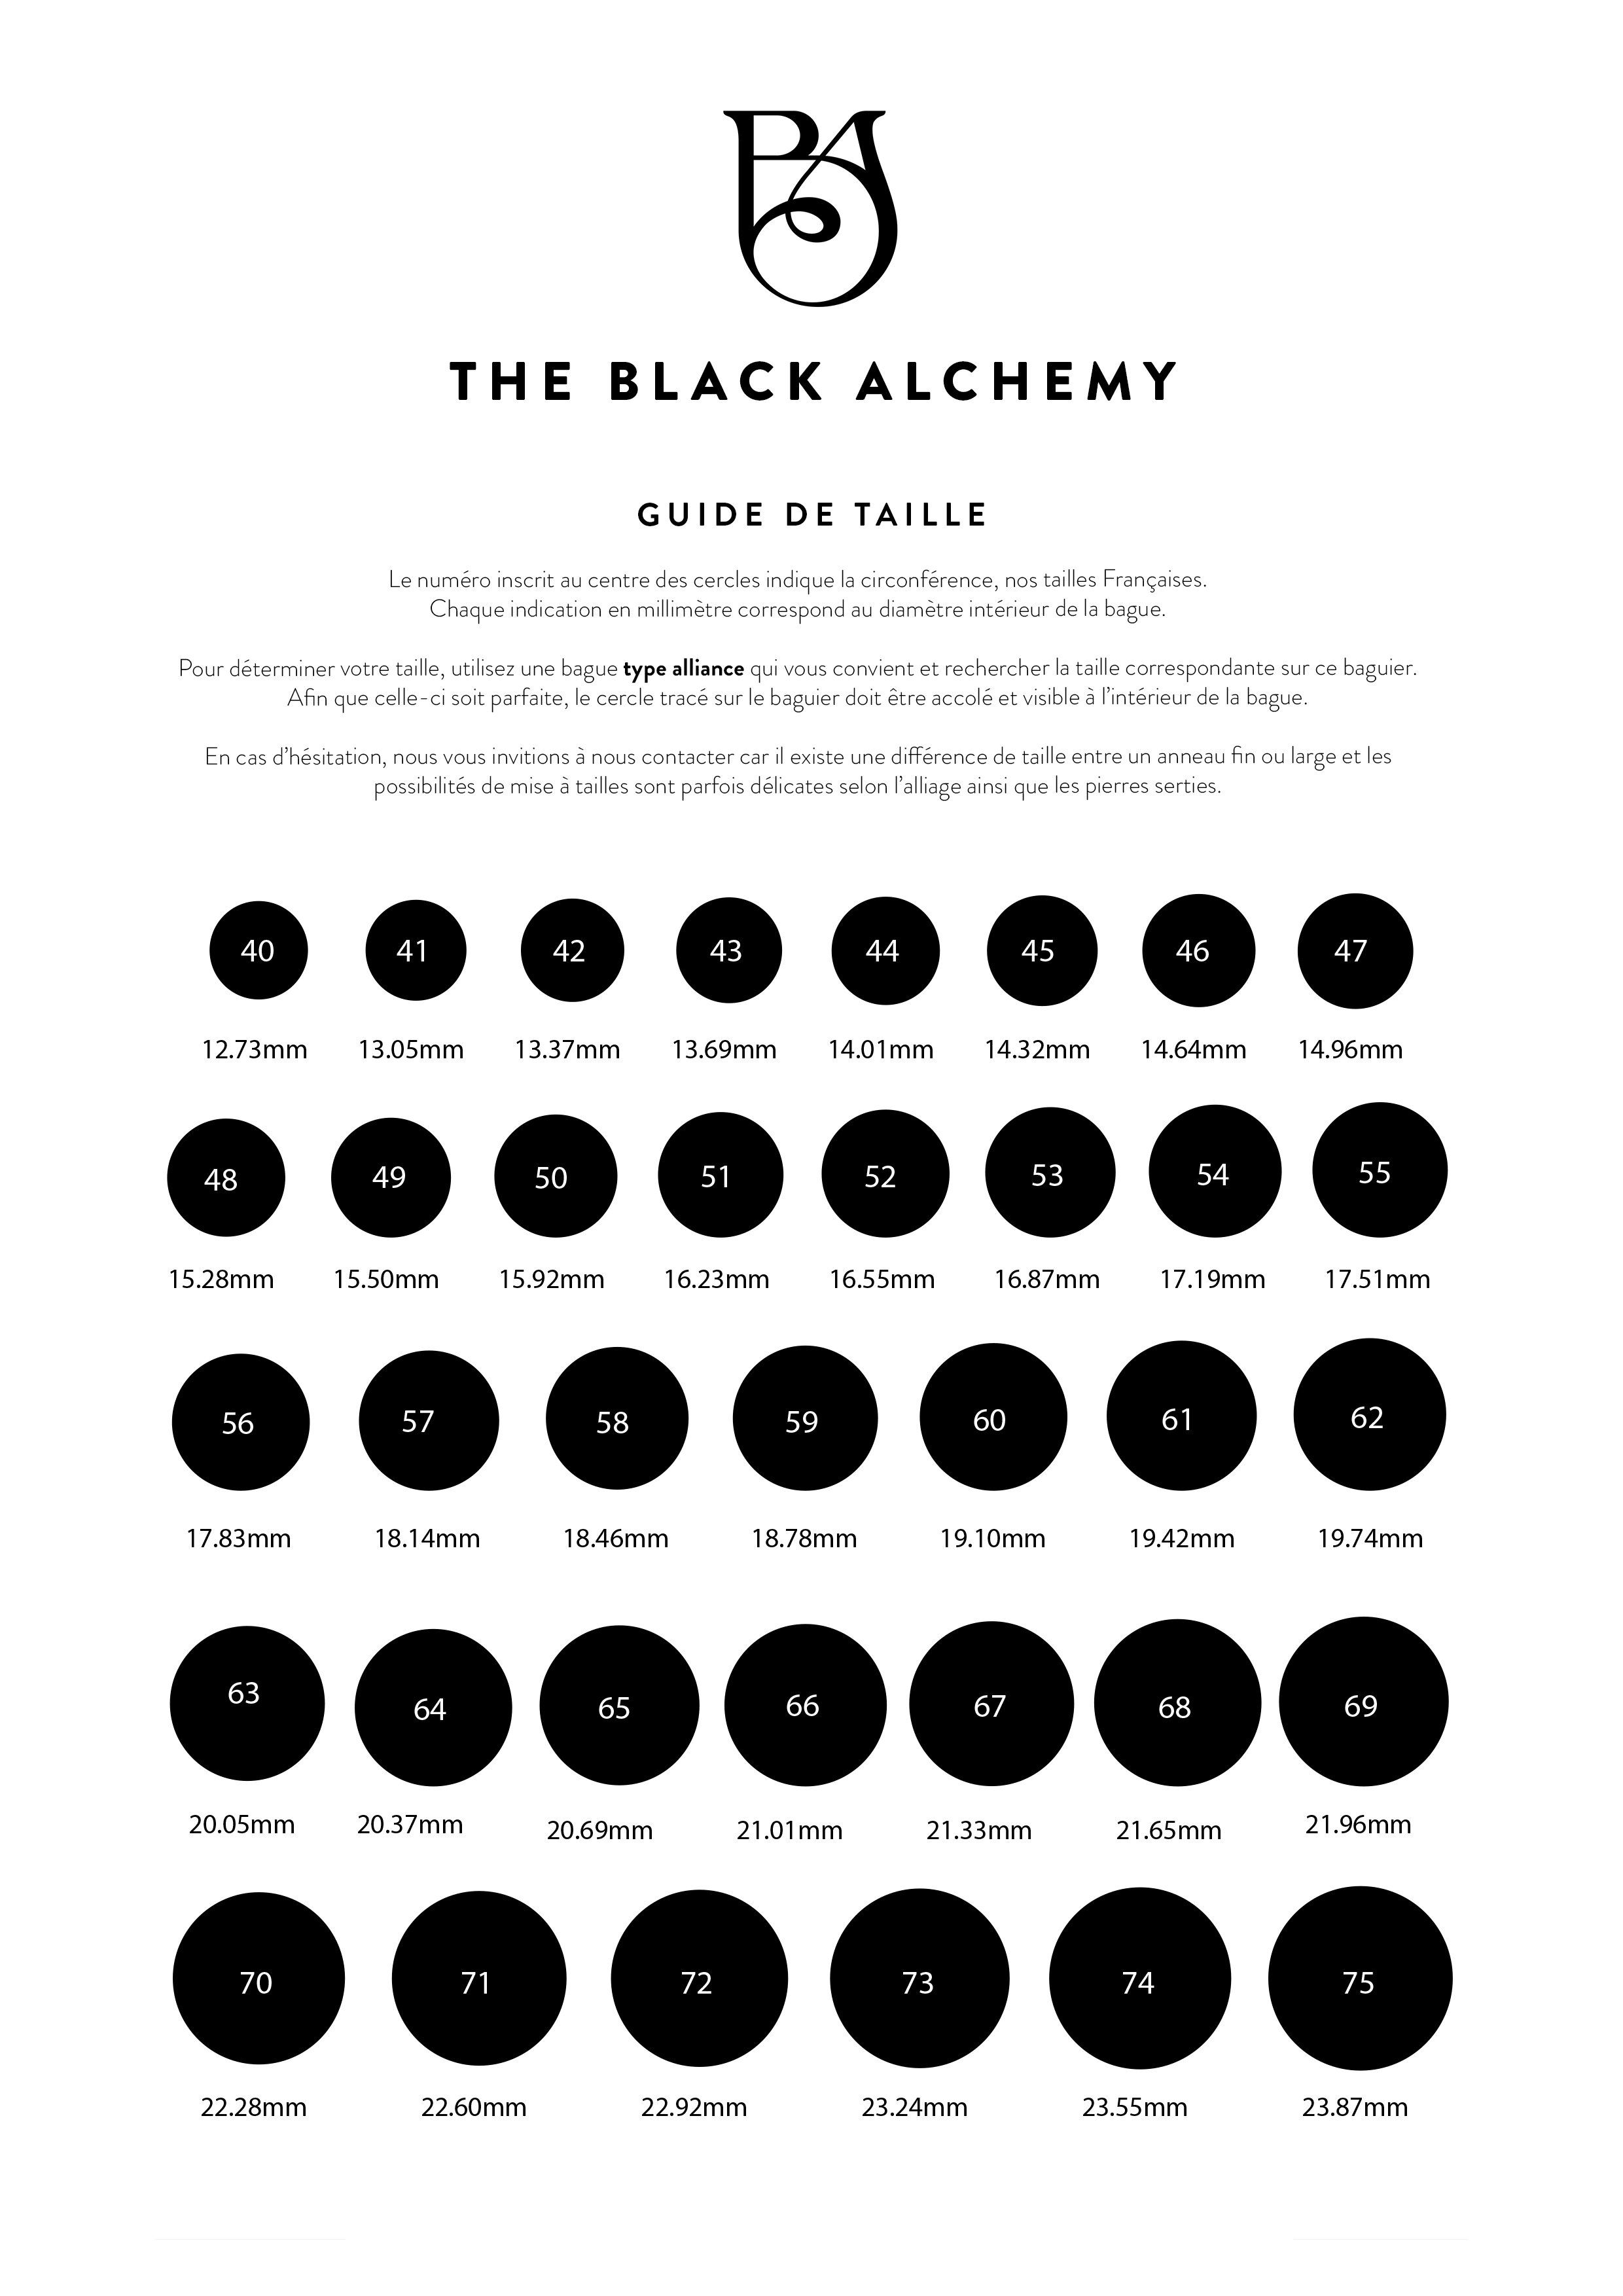 THE-BLACK-ALCHEMY-RING-SIZE-GUIDE.jpg